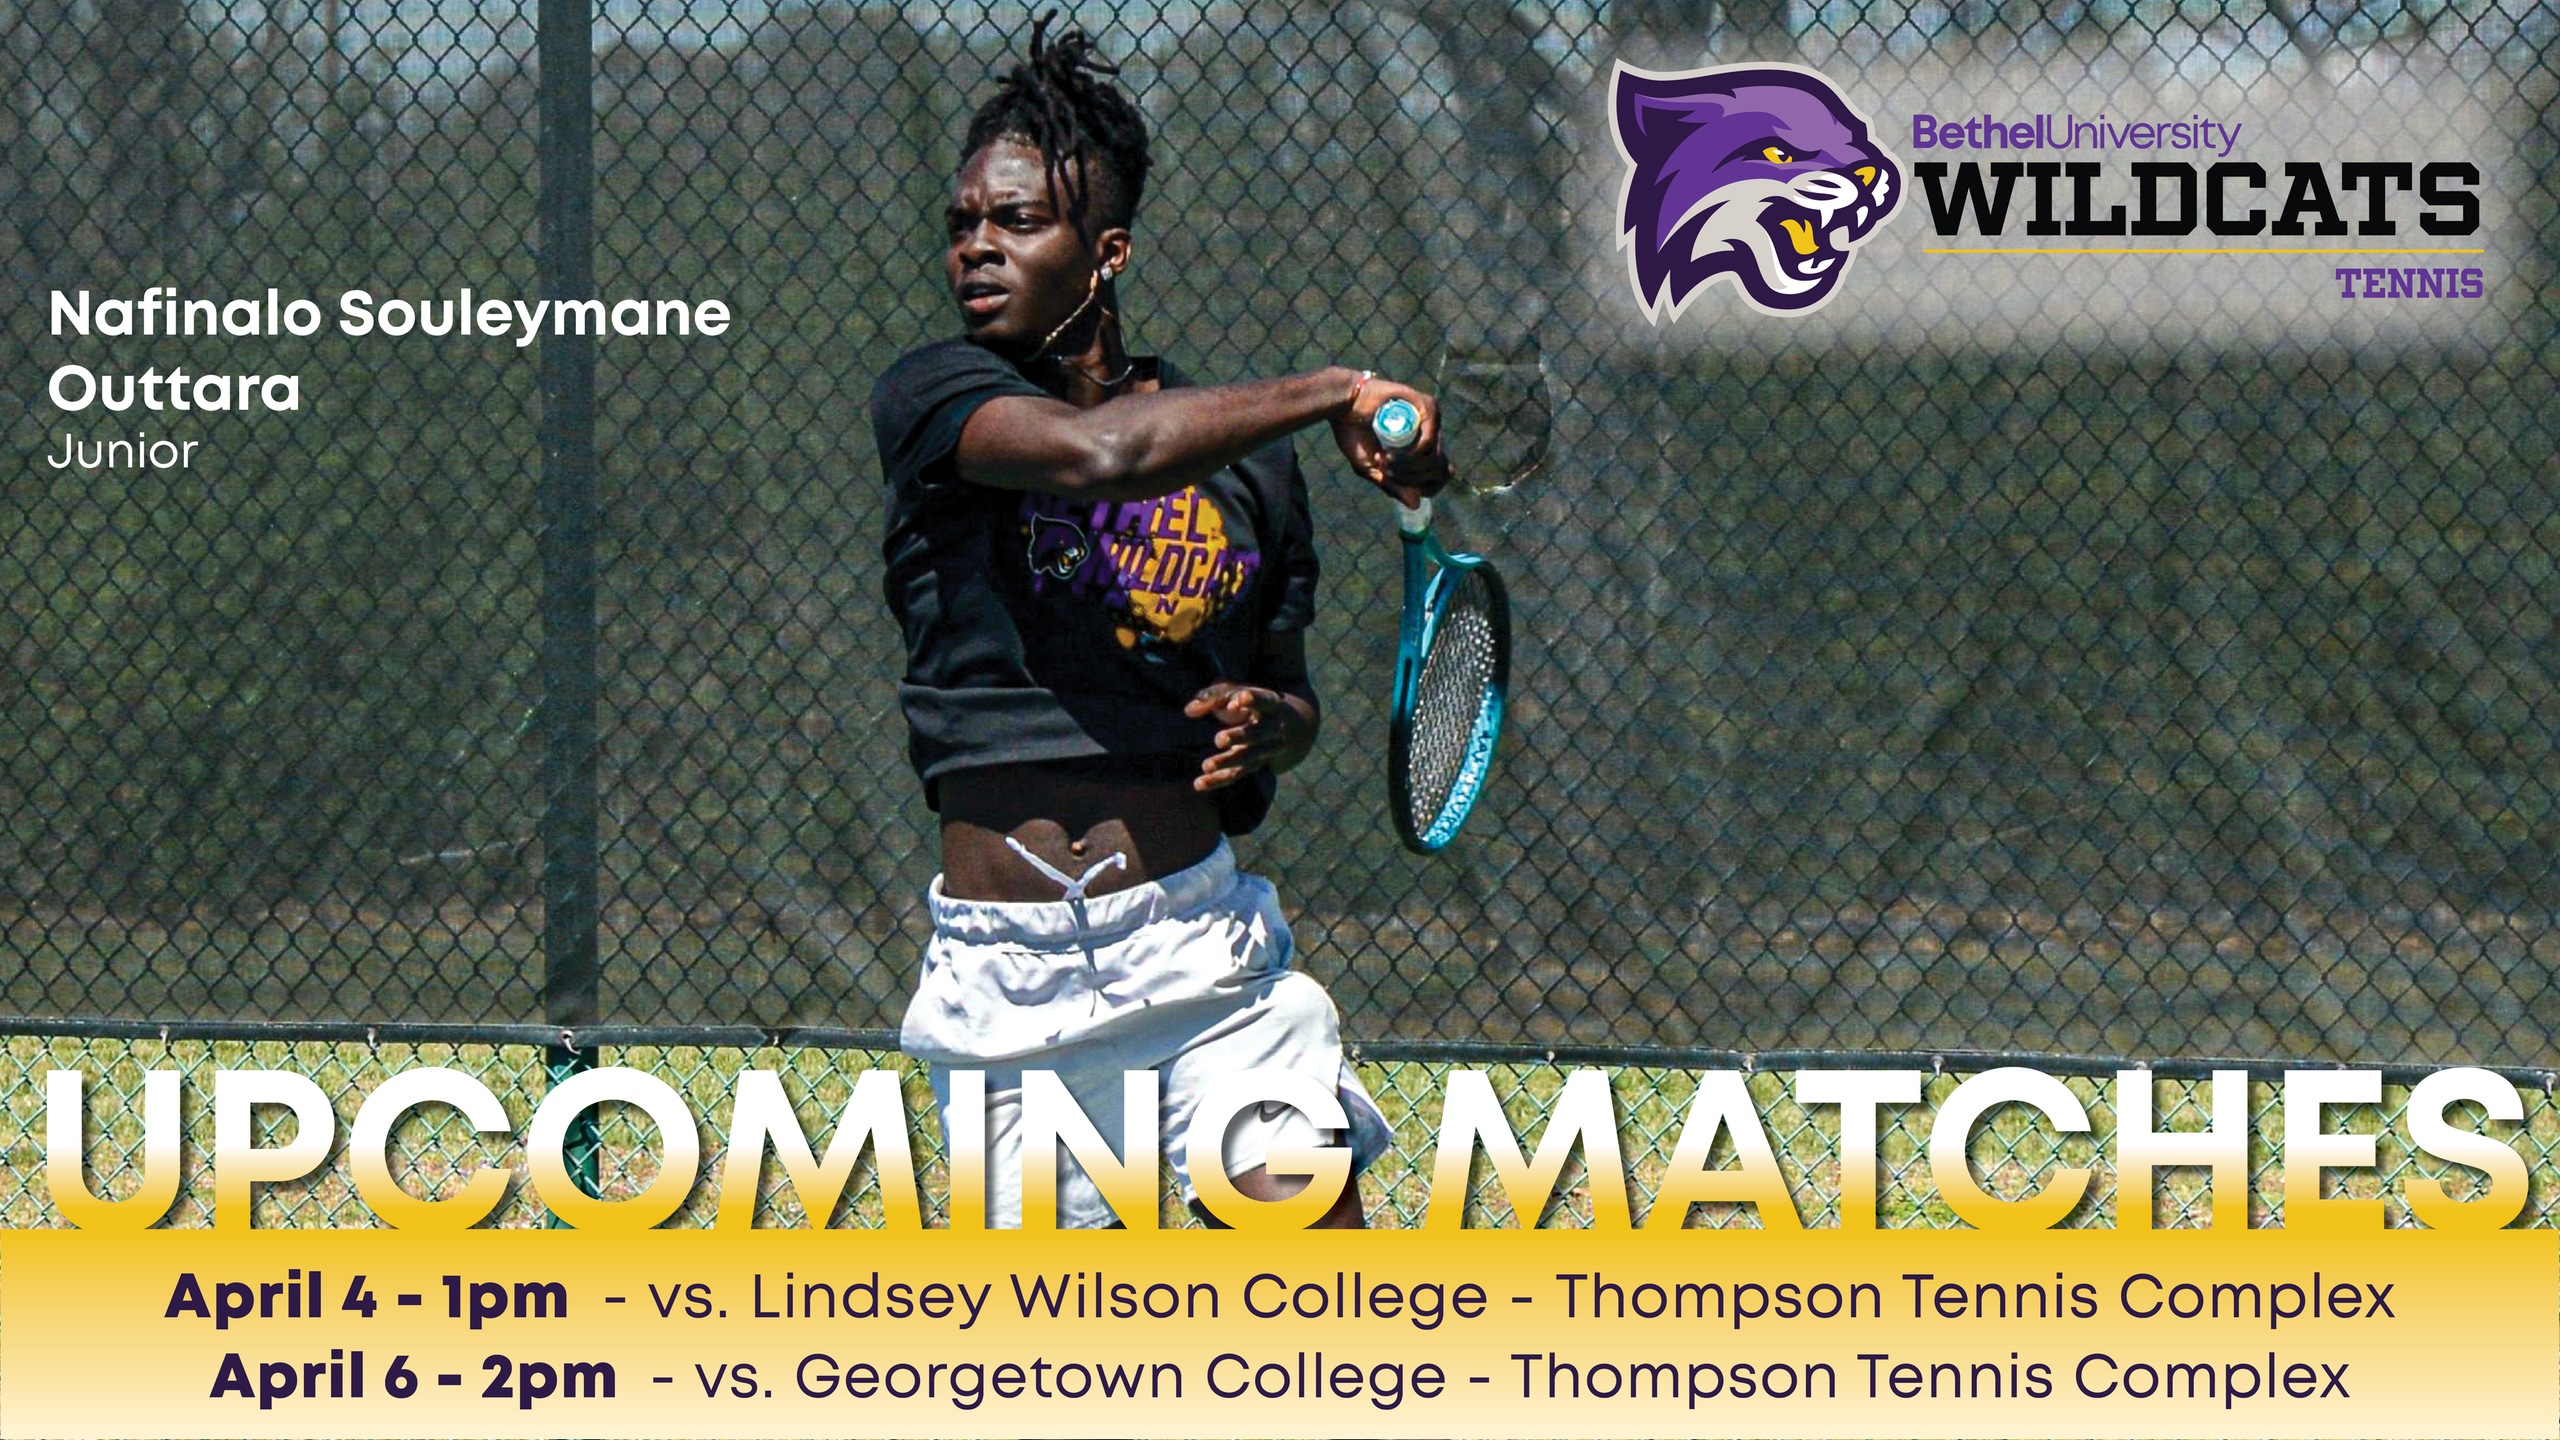 Key Conference Home Matches this Week for Men's Tennis